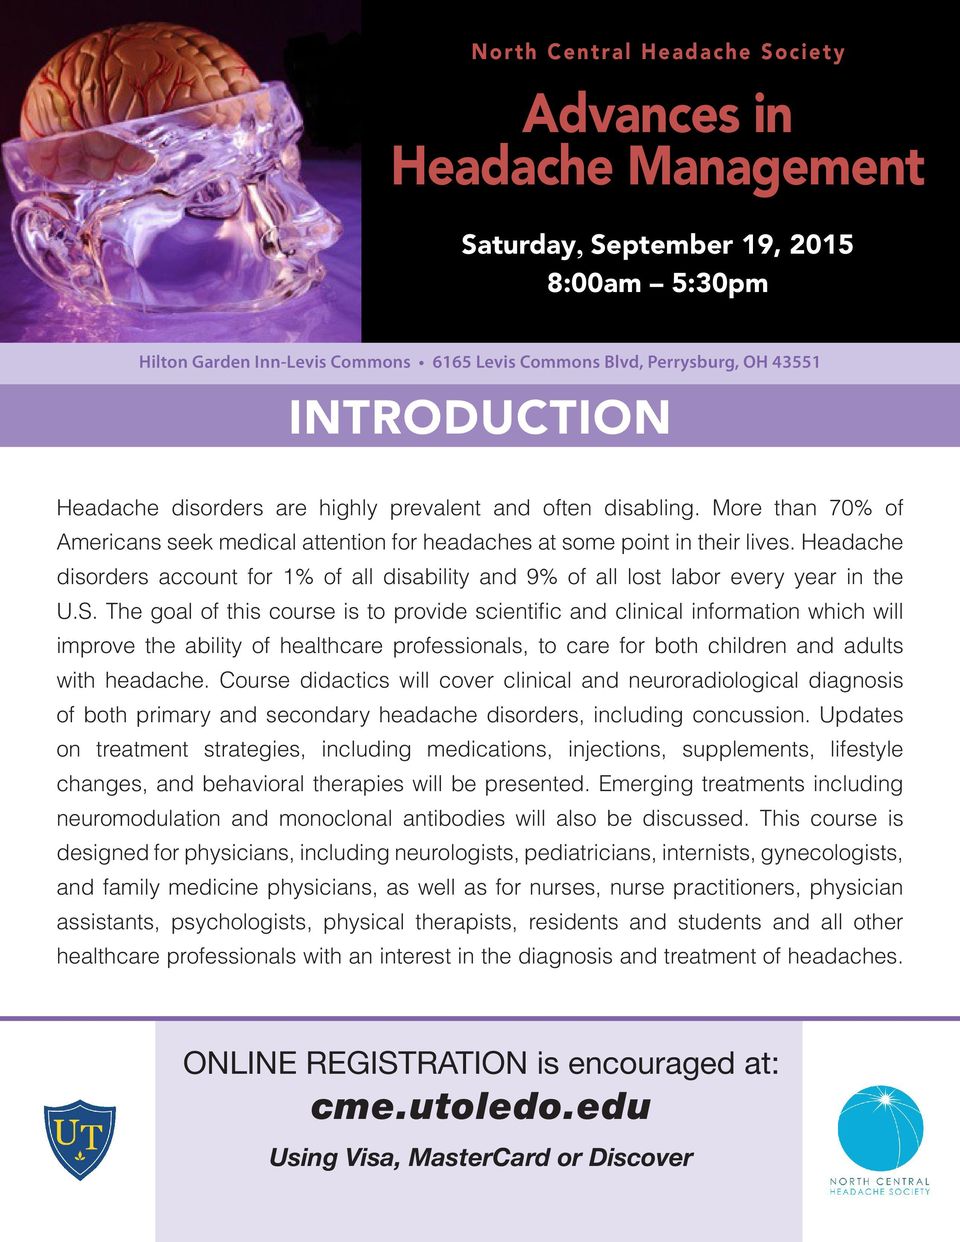 The goal of this course is to provide scientific and clinical information which will improve the ability of healthcare professionals, to care for both children and adults with headache.